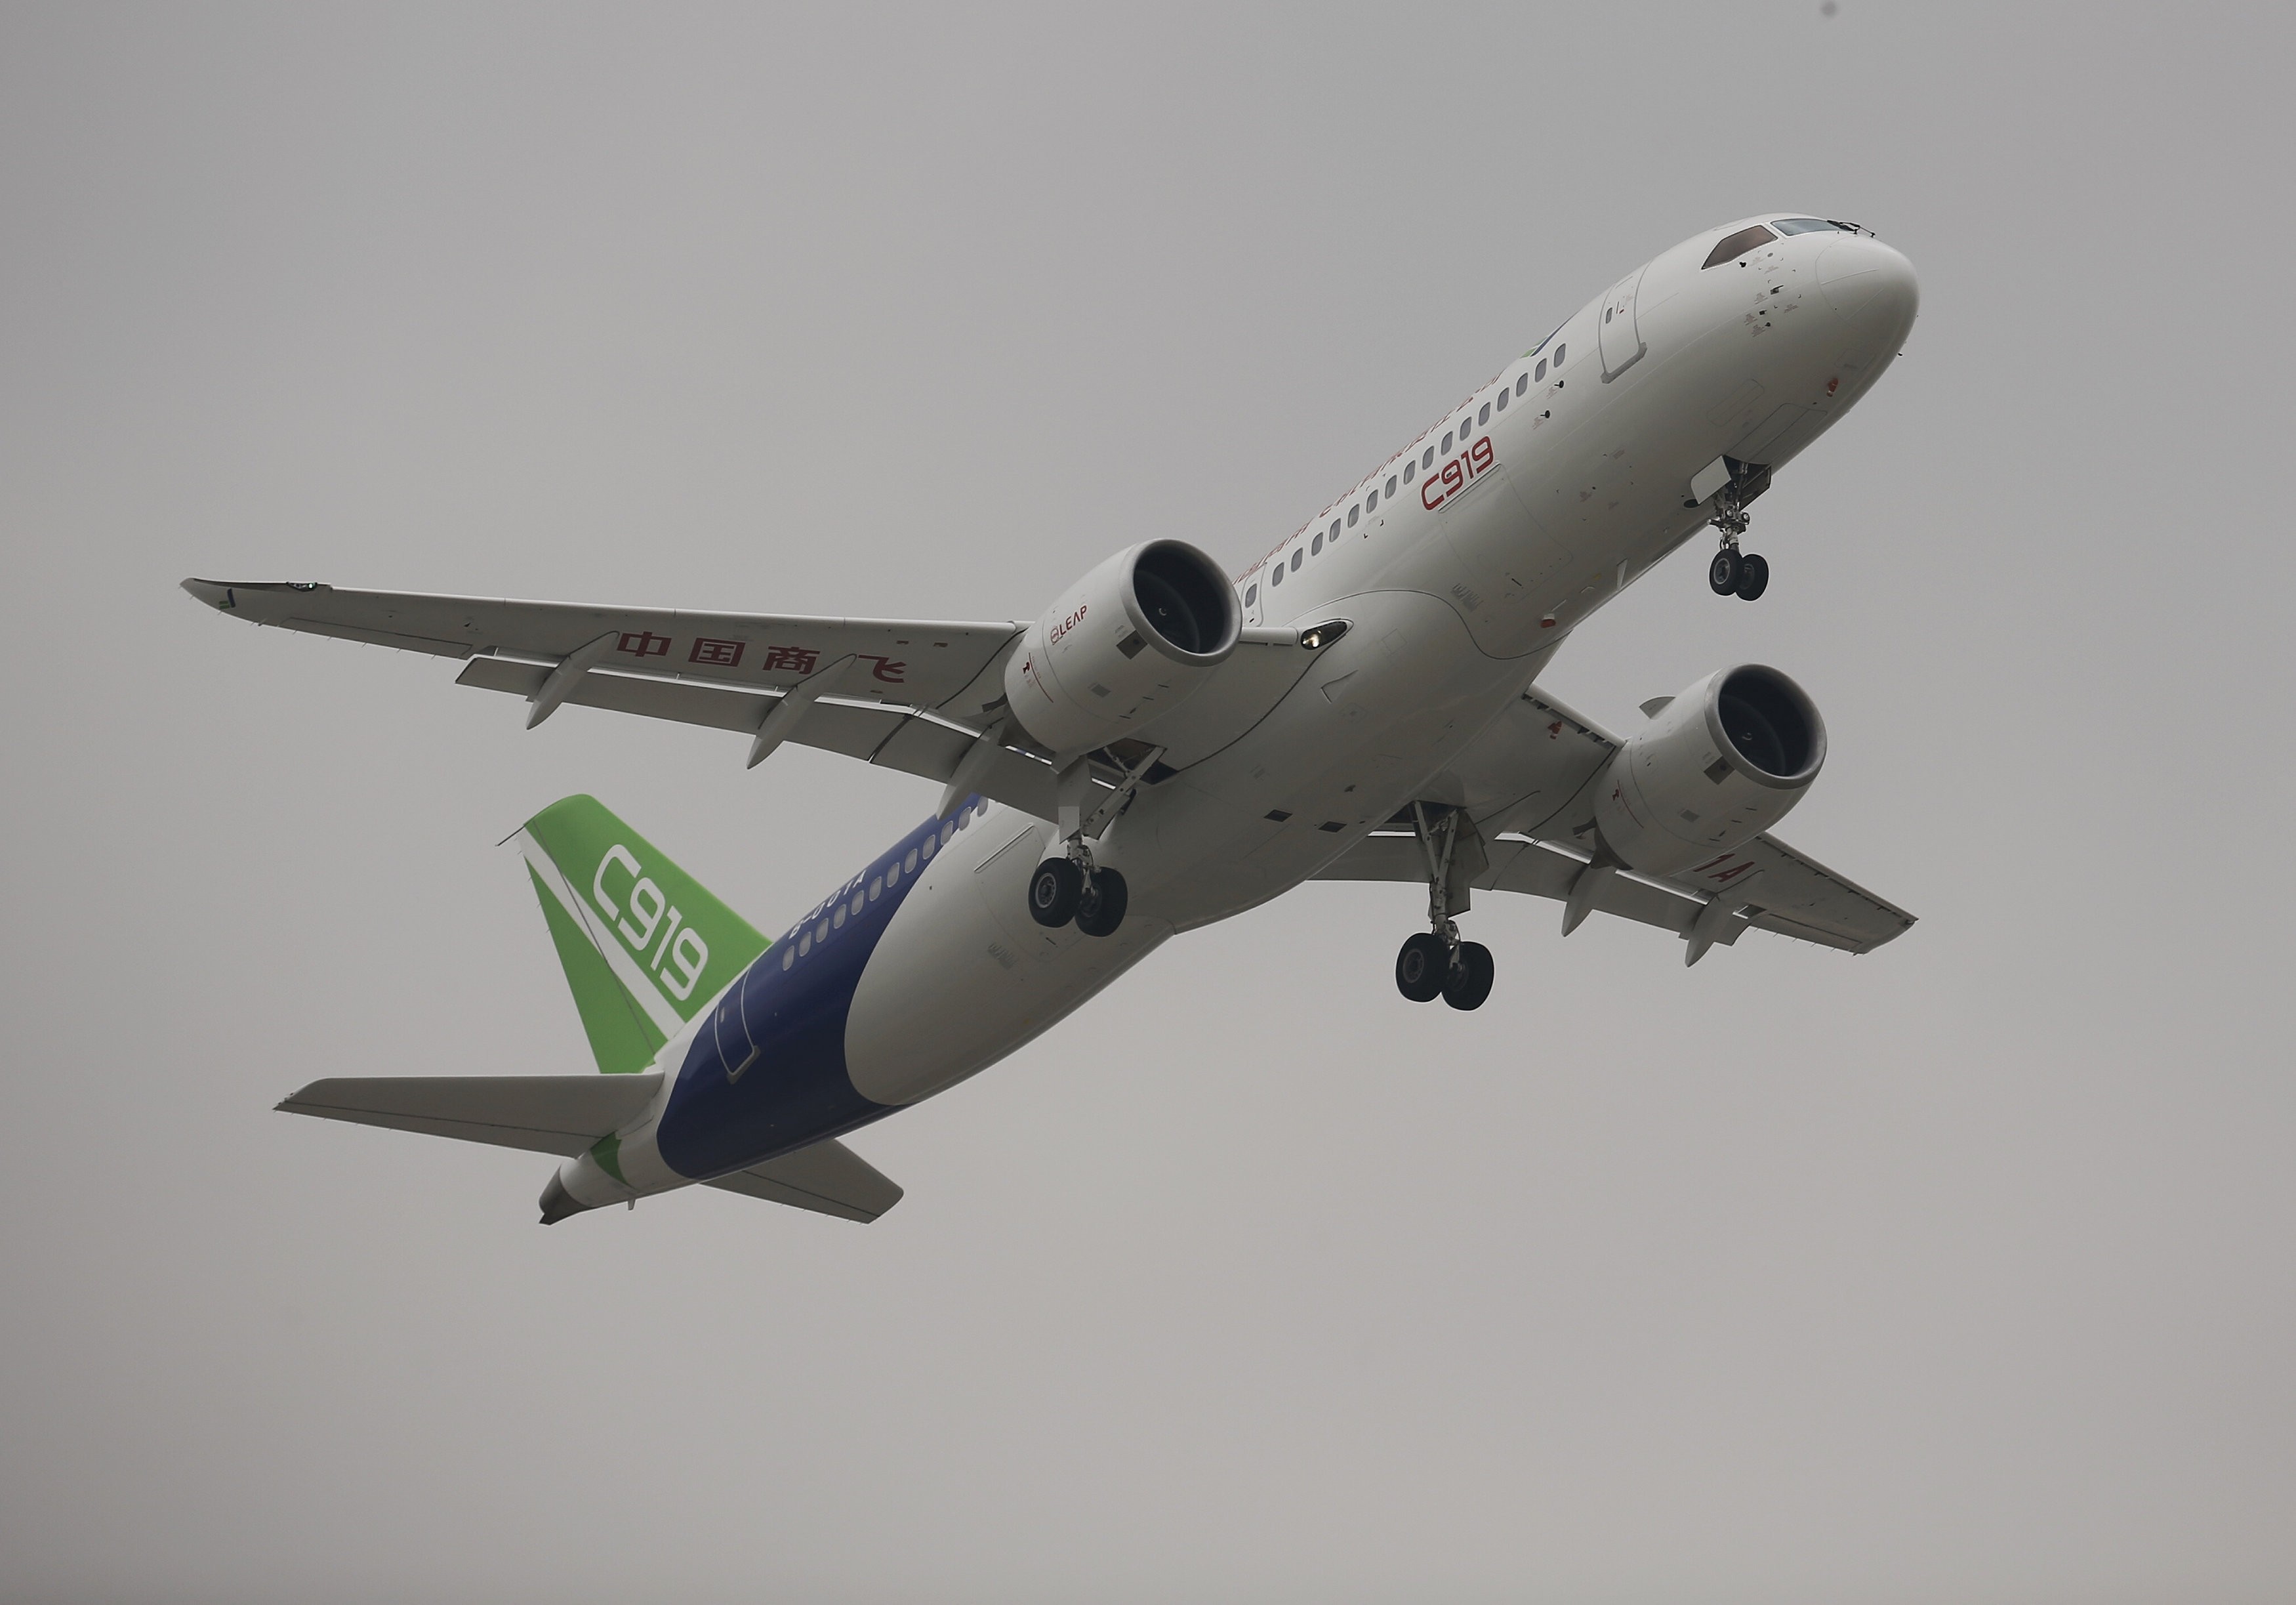 China's home-grown C919 passenger jet takes off on its first flight at Pudong International Airport in Shanghai, early this month. China’s aviation market is among those eyed by European firms. Photo: Reuters